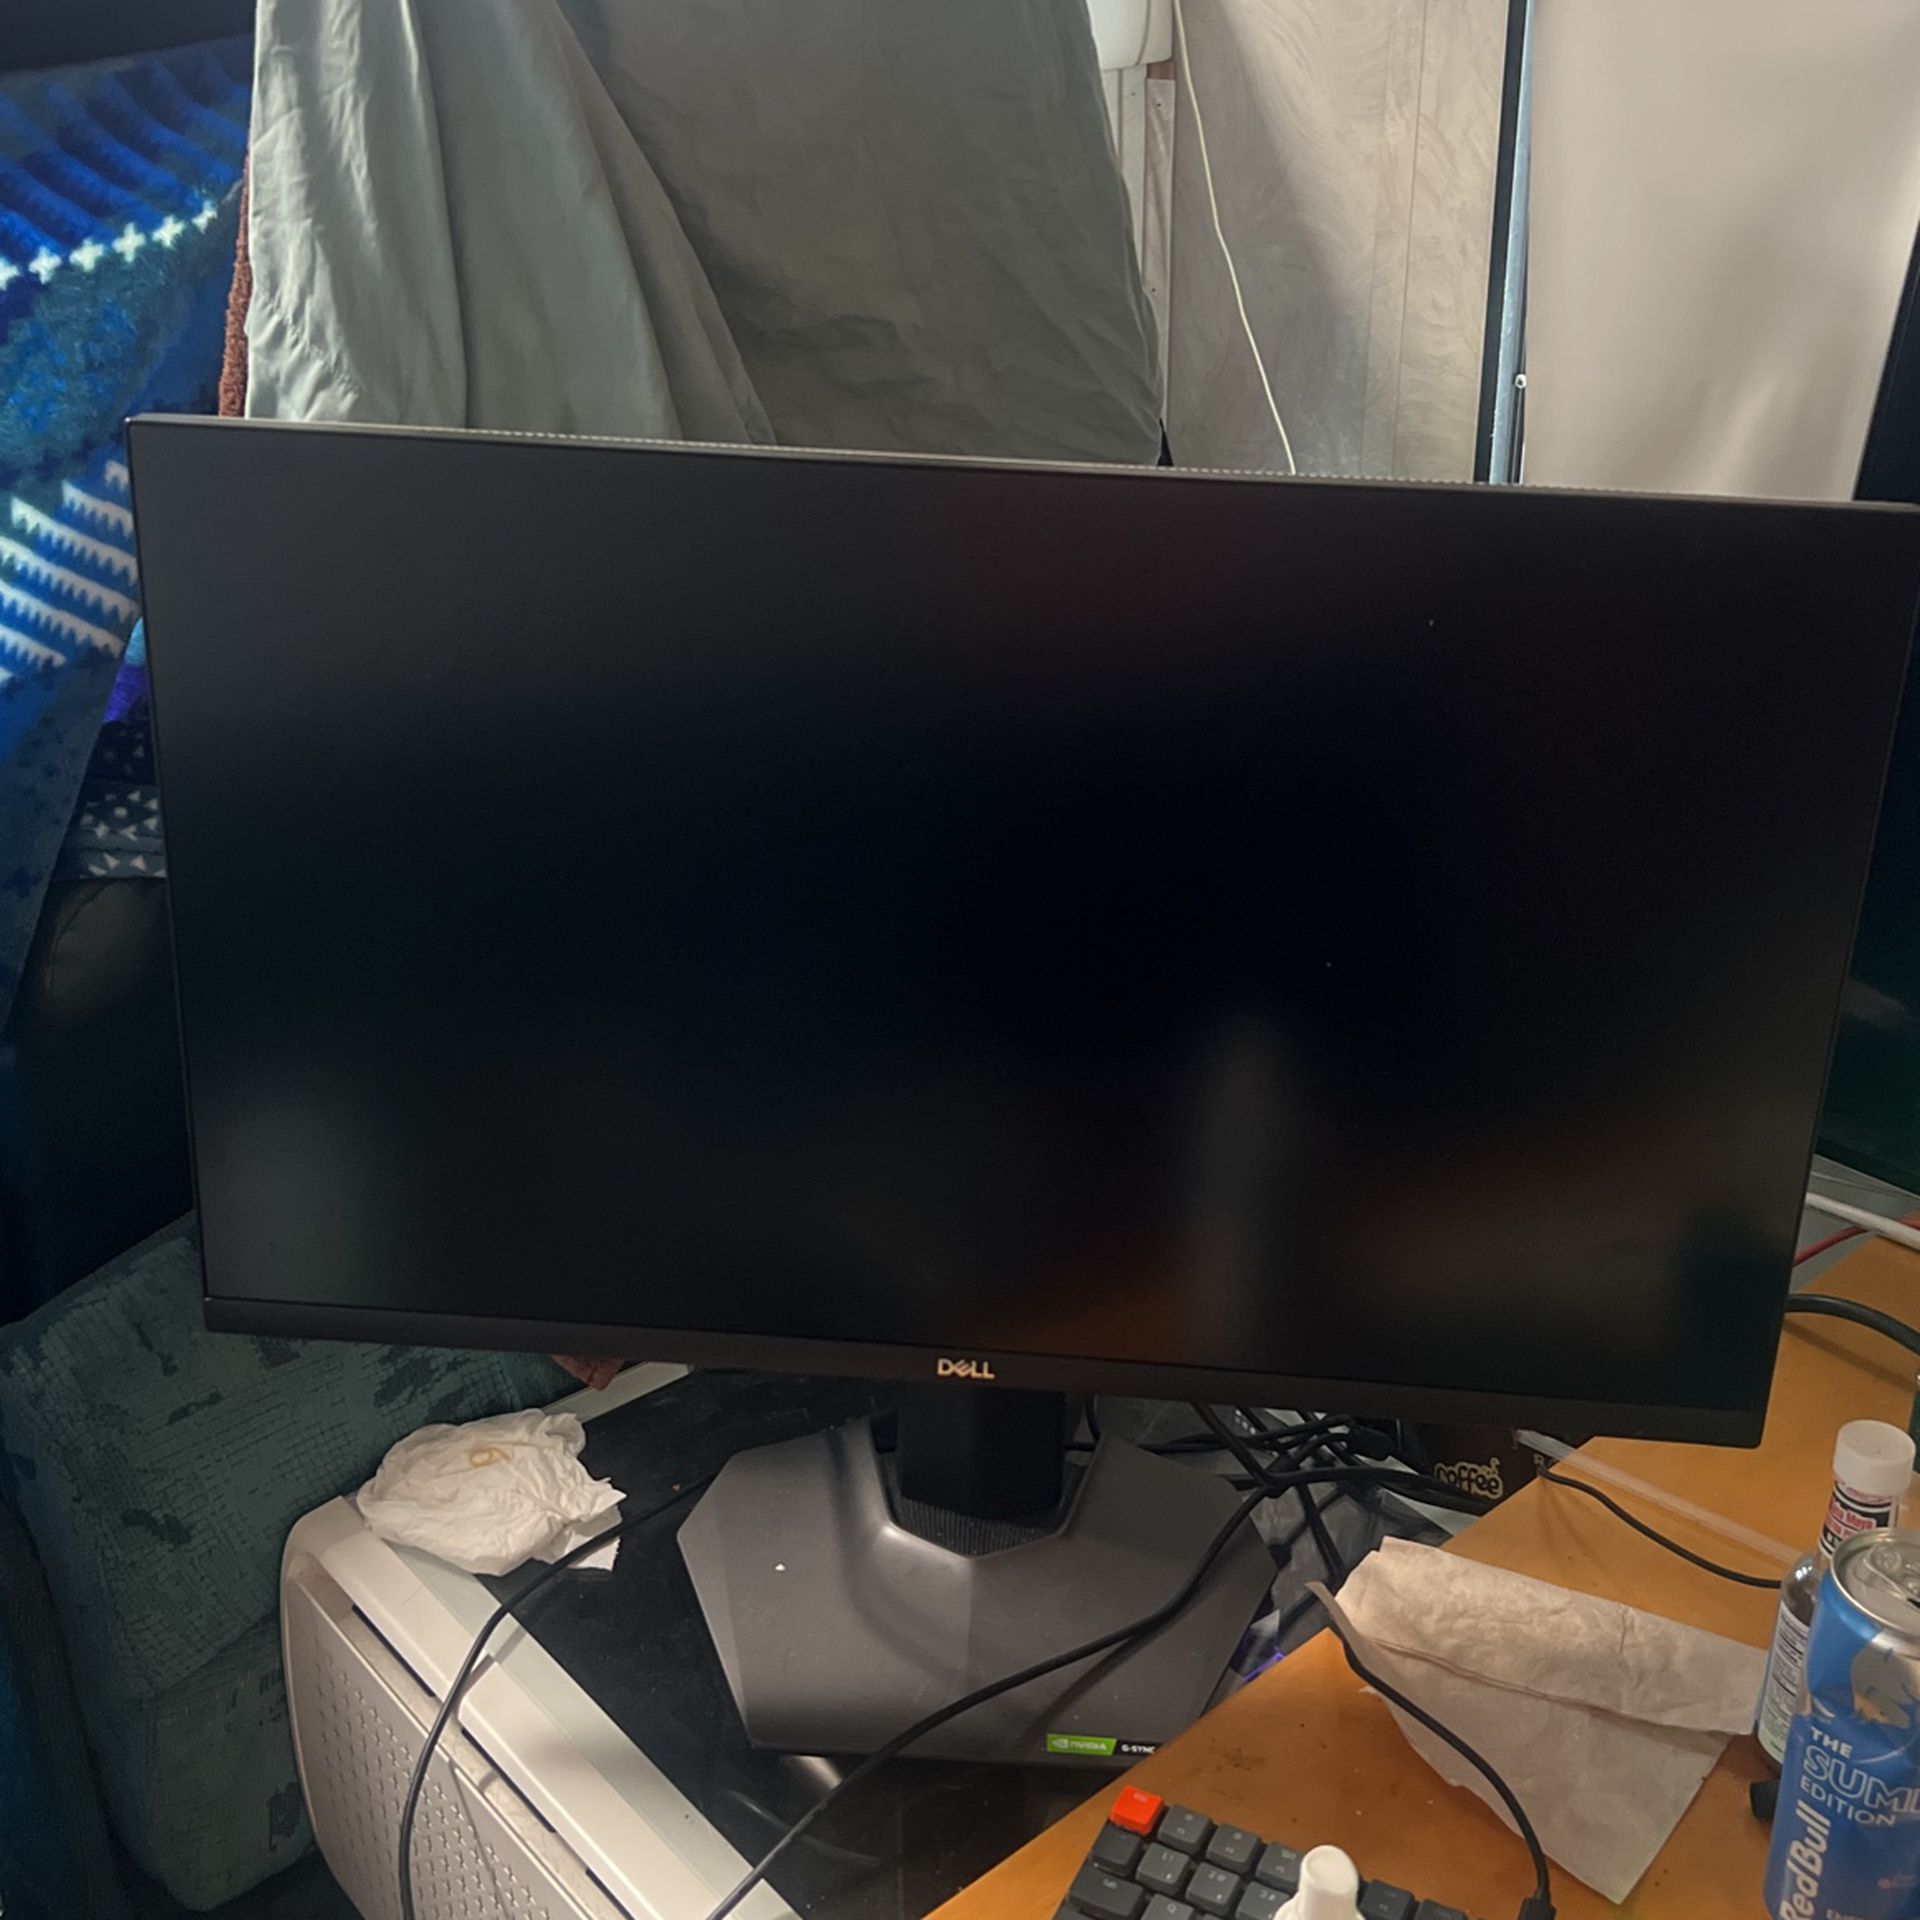 Dell S2721QS 27 inch 4k Monitor for Sale in Inglewood, CA - OfferUp